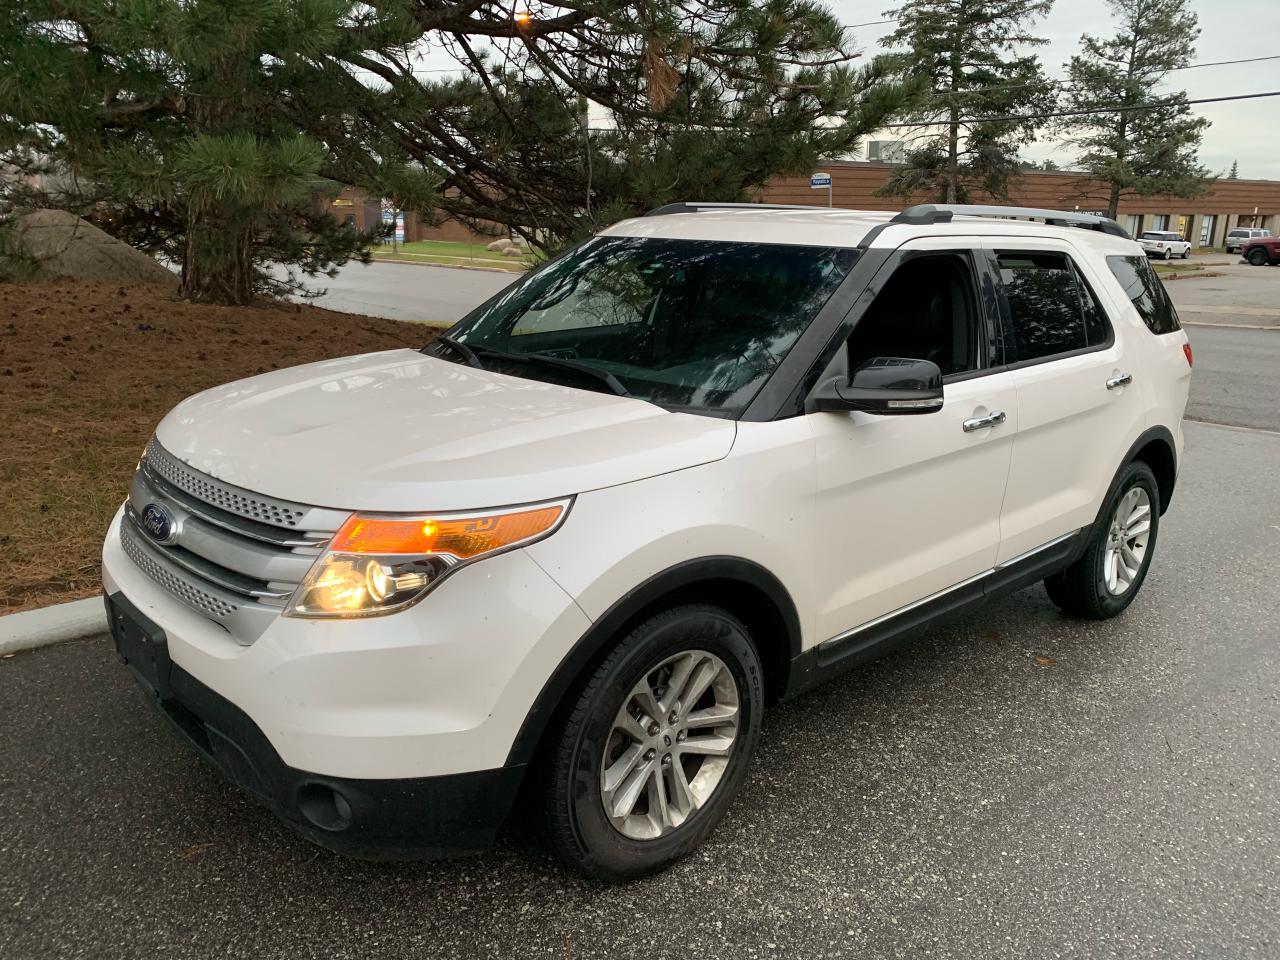 2013 Ford Explorer XLT-FRONT WHEEL DRIVE-1 LOCAL OWNER! GPS/LEATHER - Photo #3